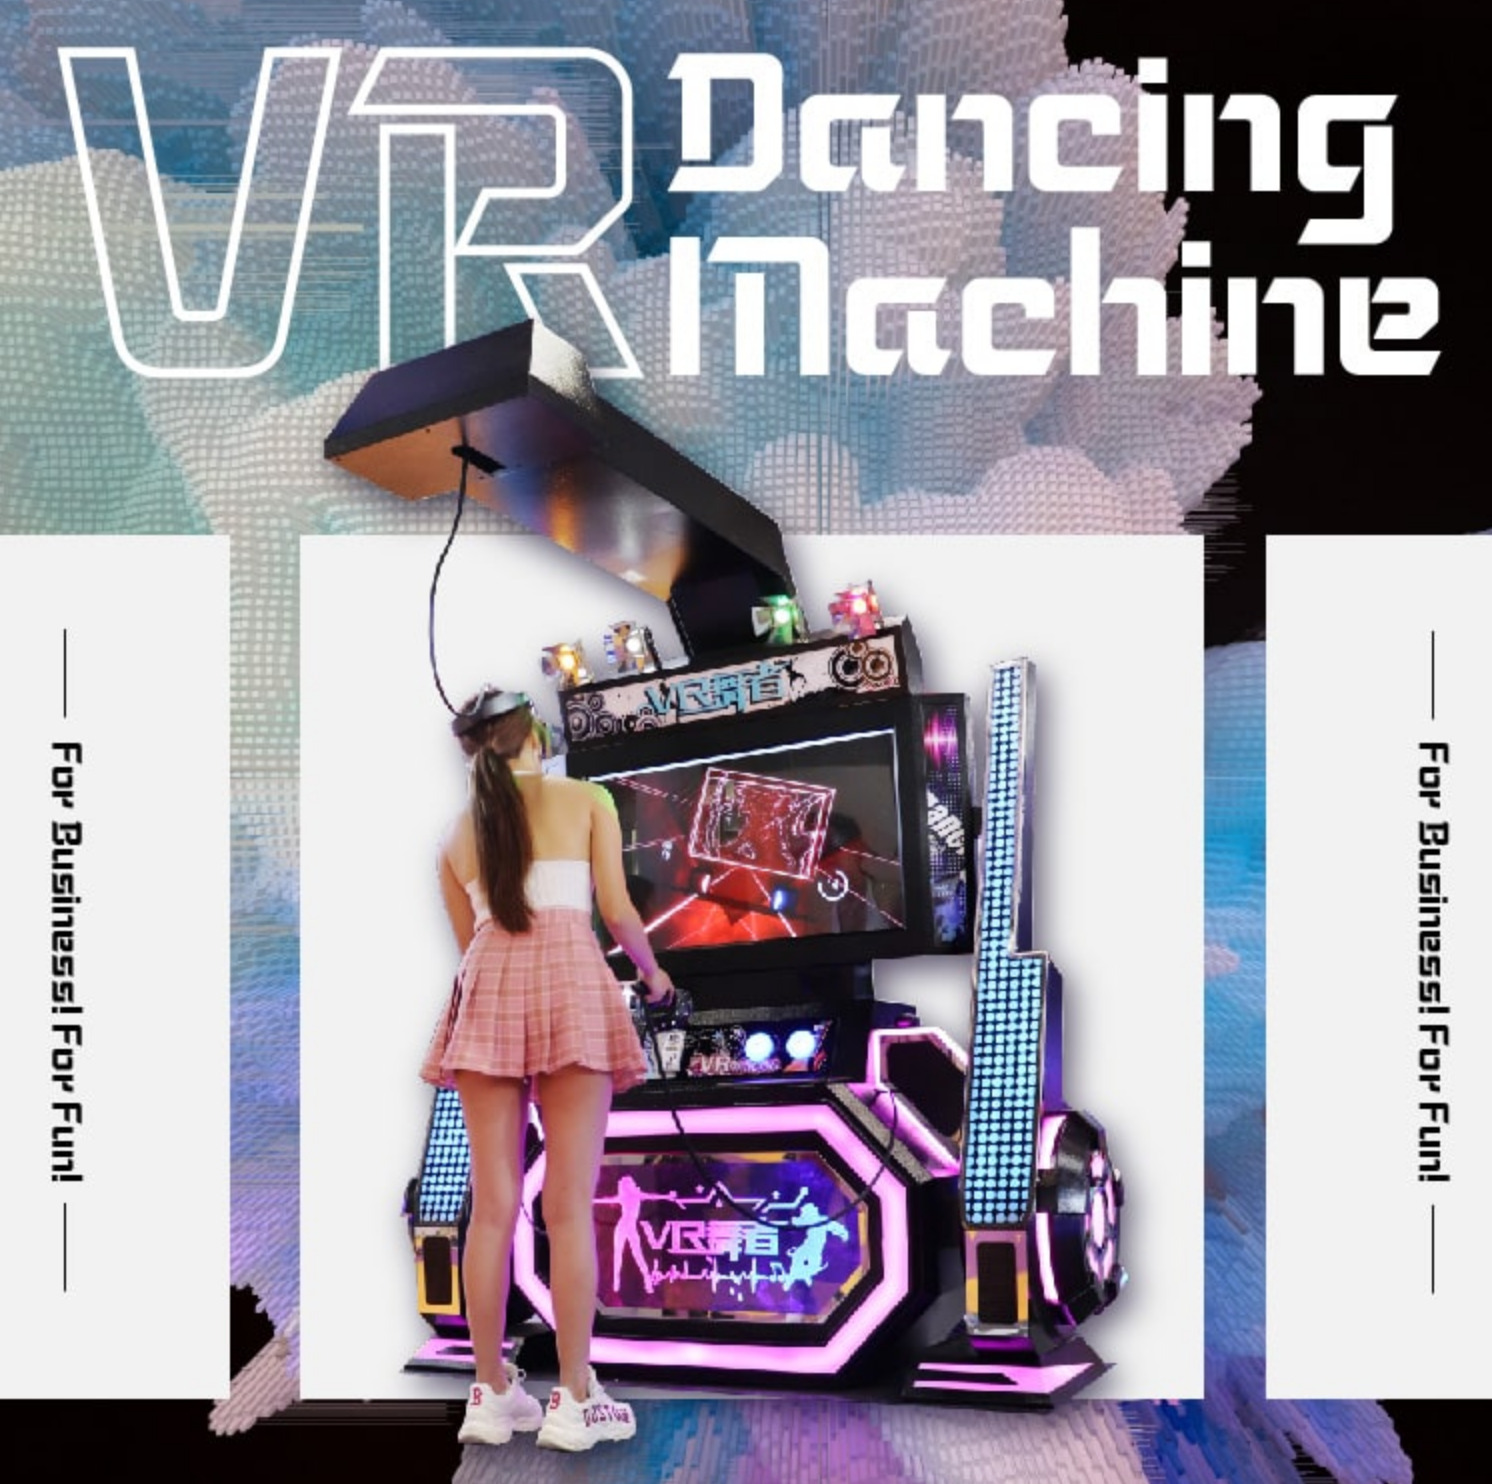 Commercial Virtual Reality Dance Boxing Simulator 9D VR 360 degree Arcade Game 